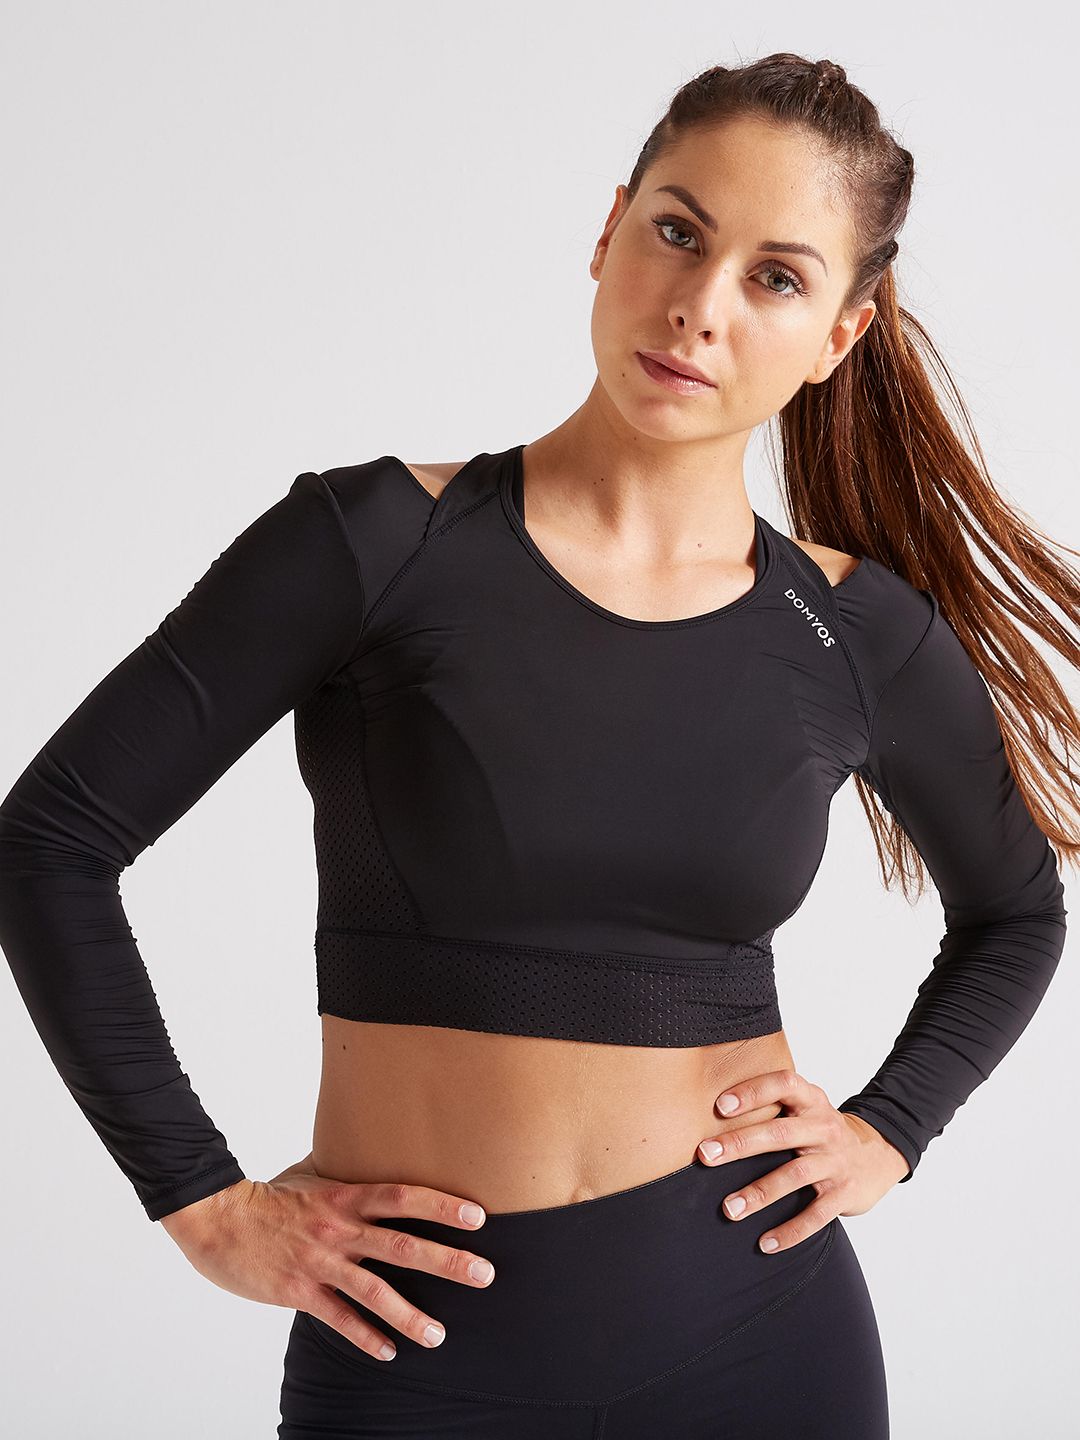 Domyos by Decathlon Women Black Long Sleeved Fitness Crop Top Price in India